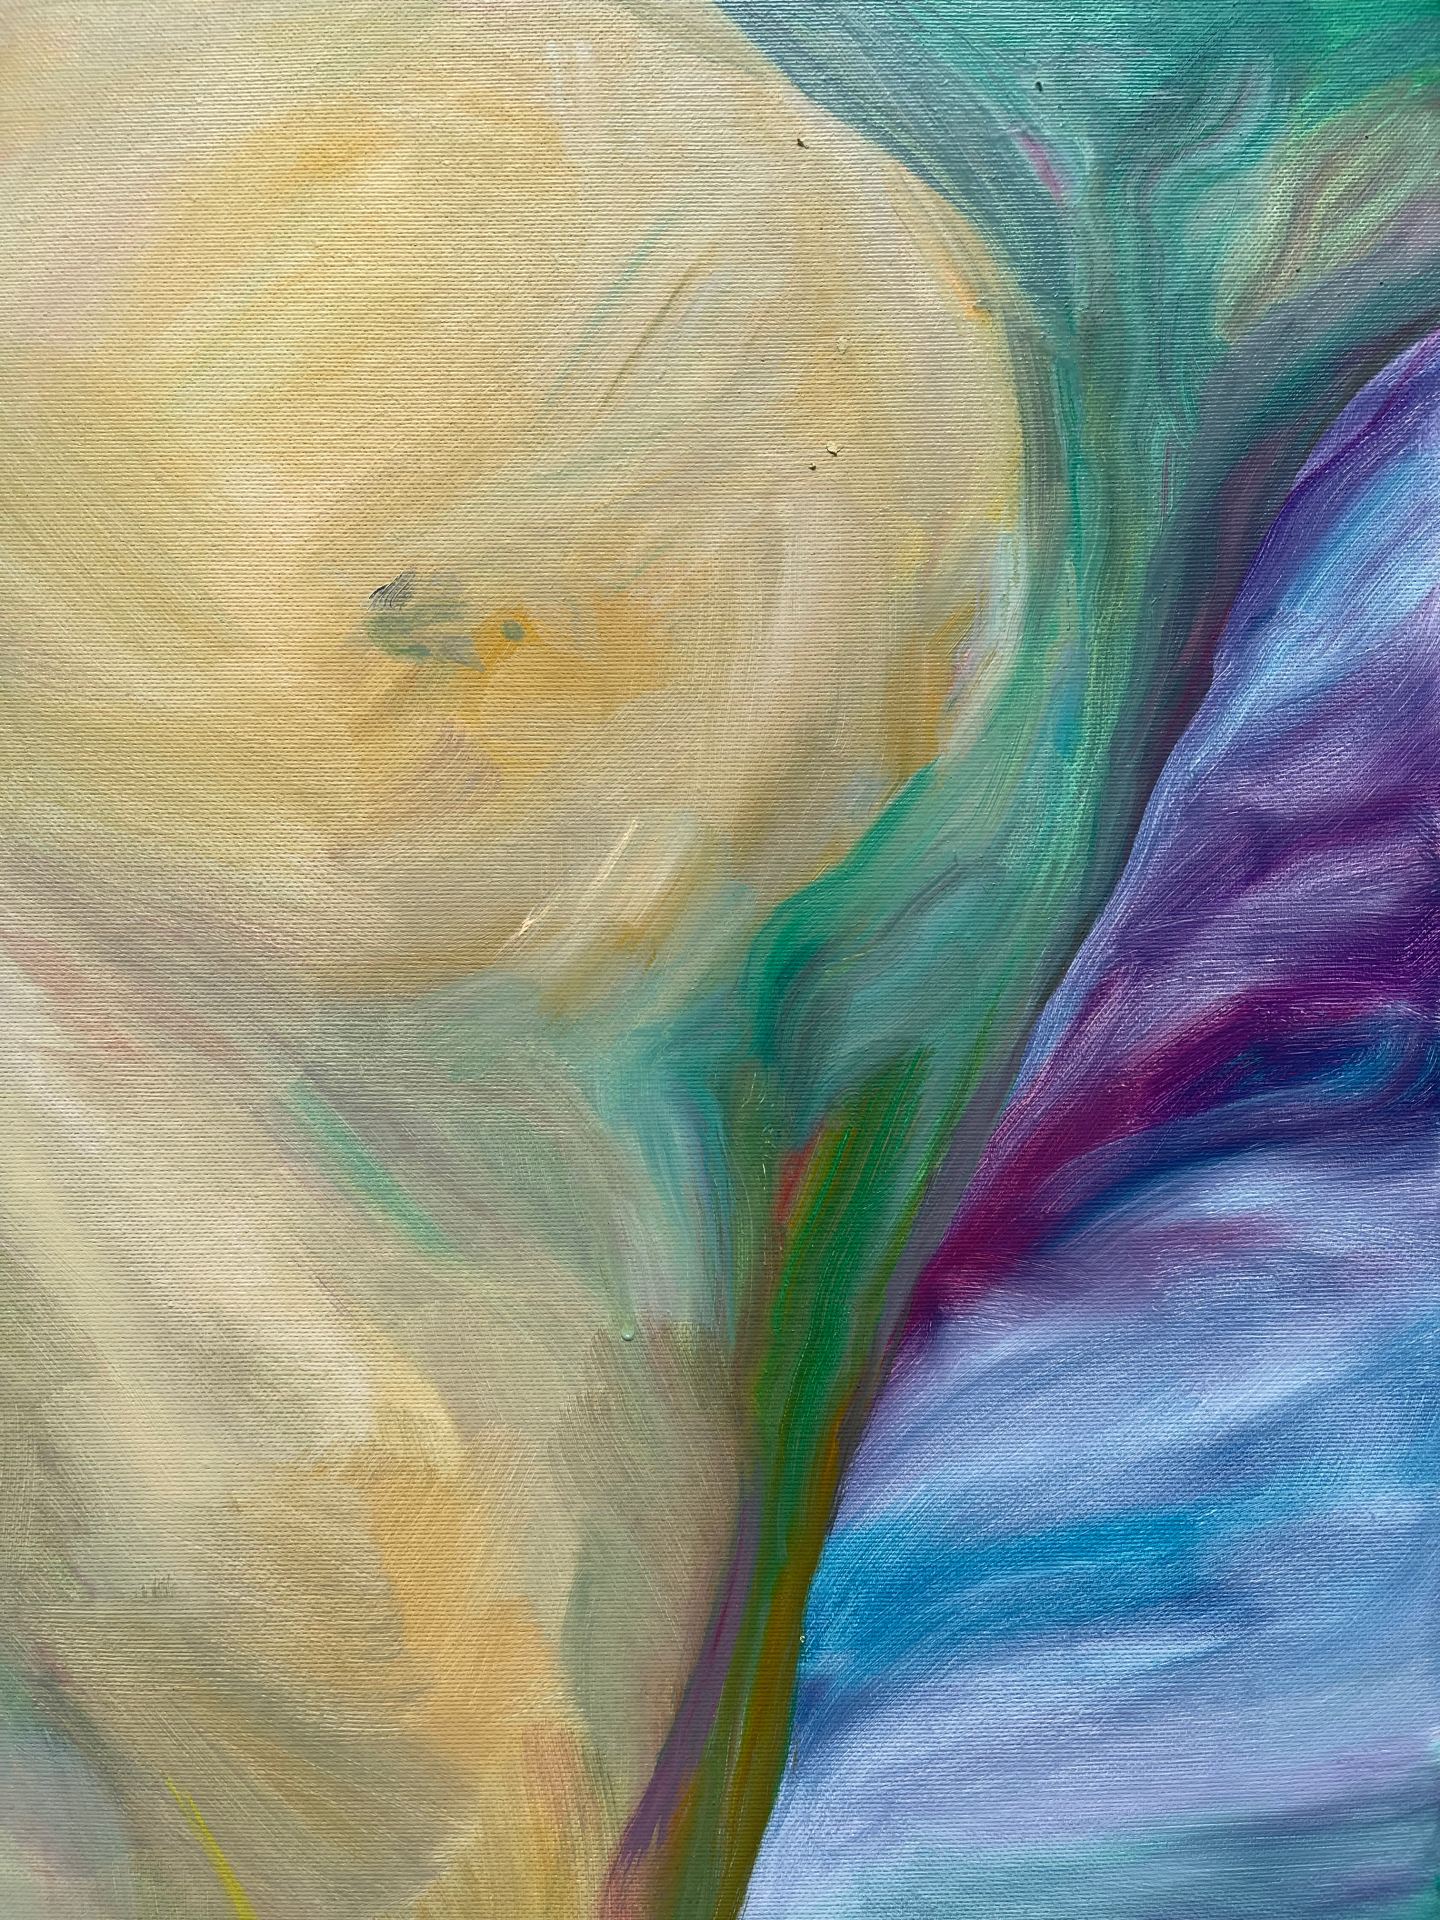 A painting of an abstract, multicoloured landscape.